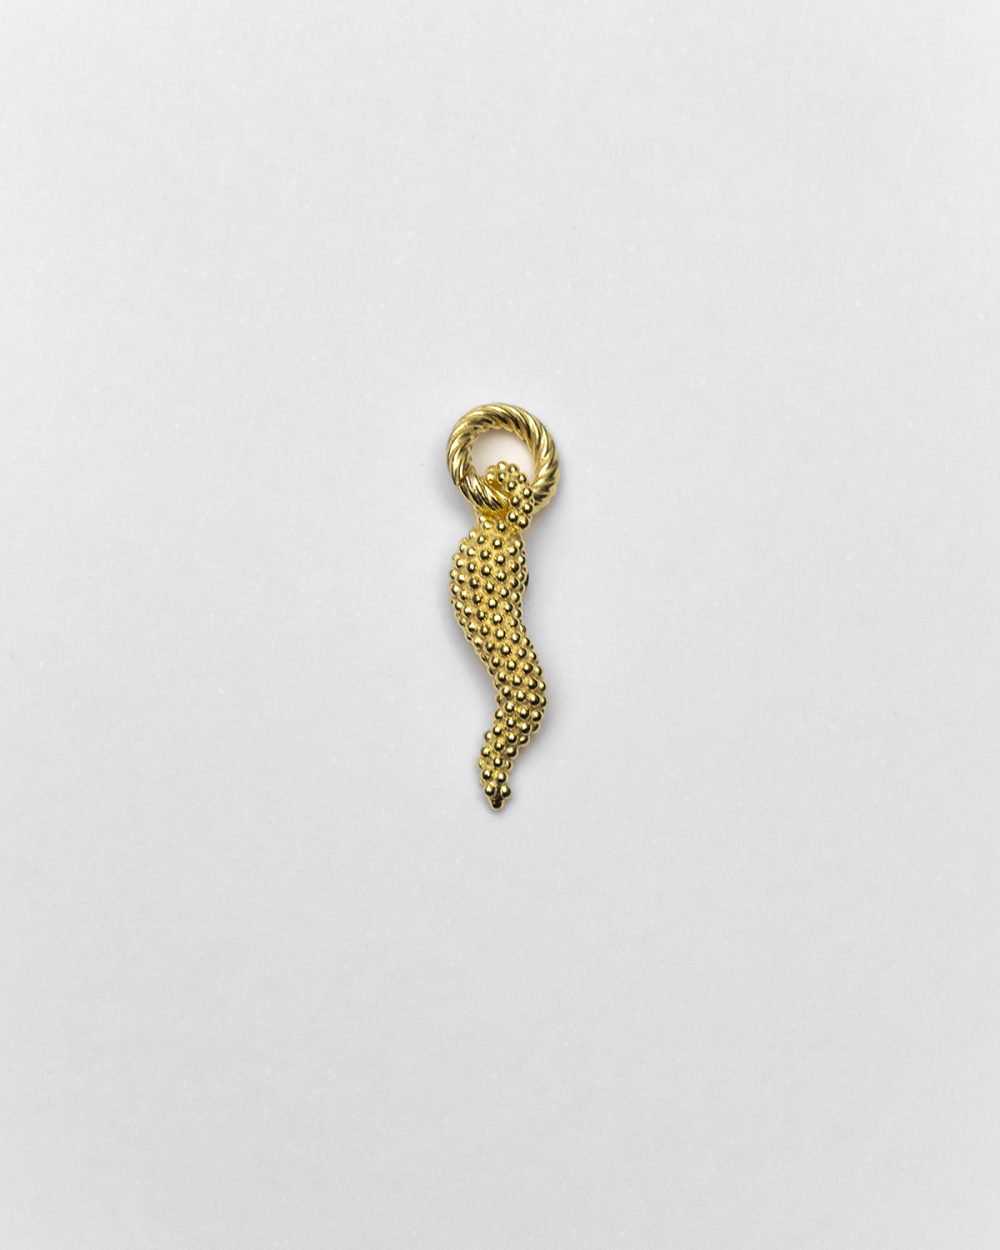 SMALL DOTTED HORN LUCKY CHARM / POLISHED YELLOW GOLD